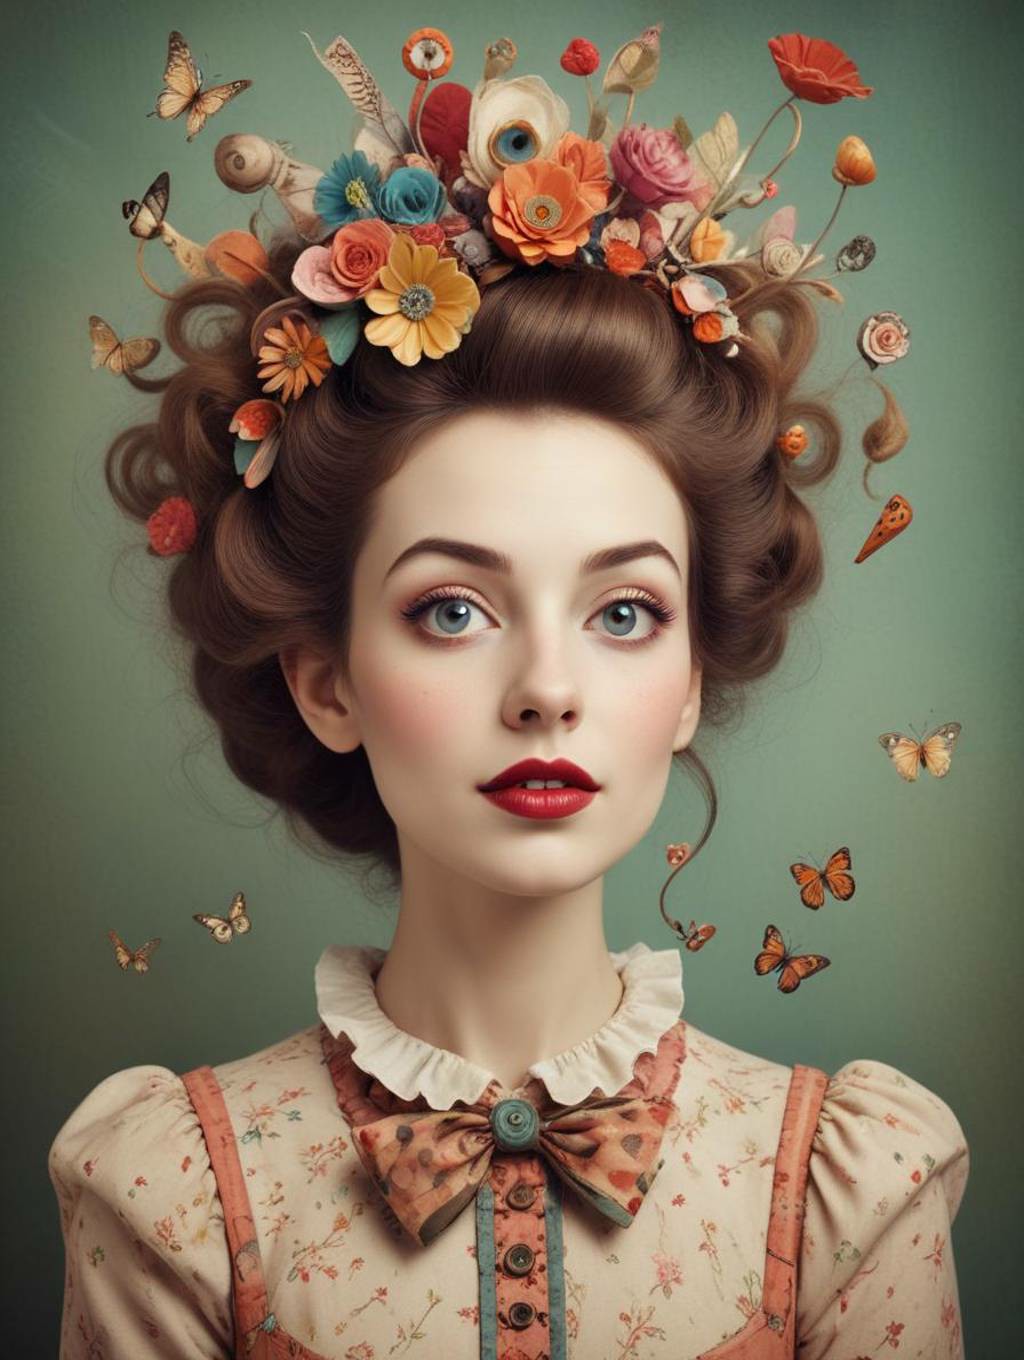 Whimsical & Quirky Women: Art Frames & Portrait Photography-Theme:4